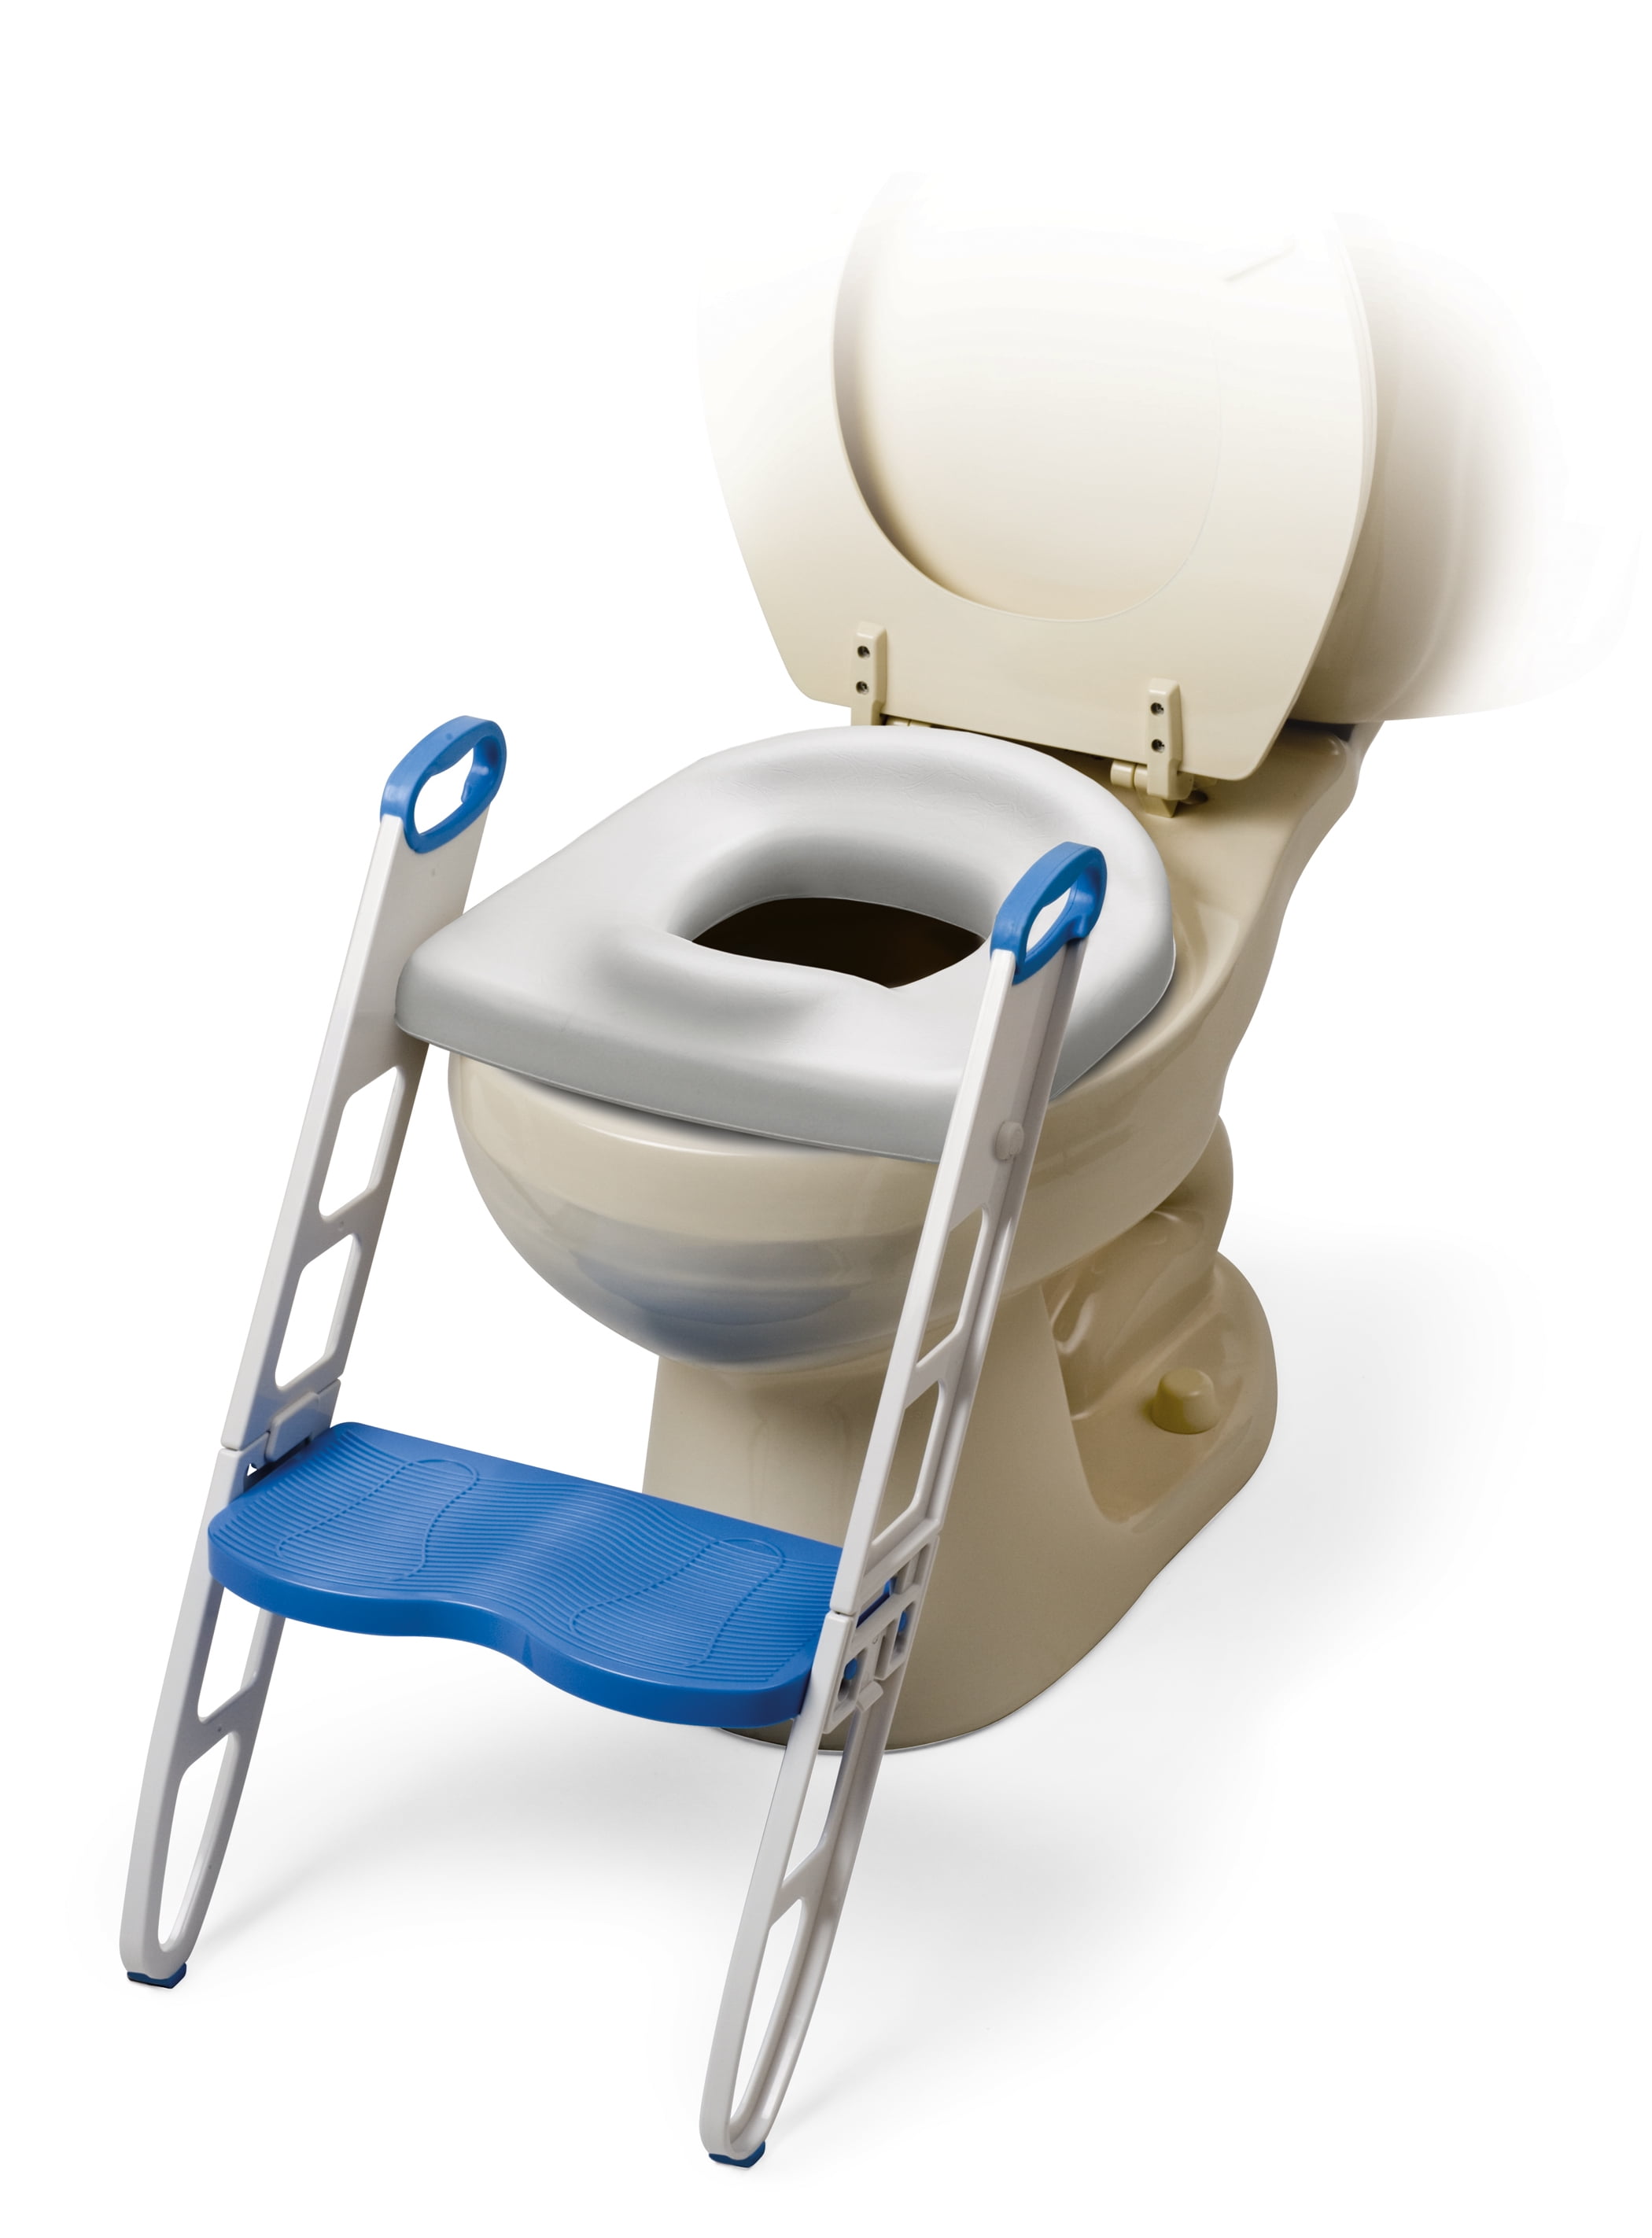 Baby Kids Training Toilet Potty Trainer Seat Chair Toddler Ladder Step Up Stool 